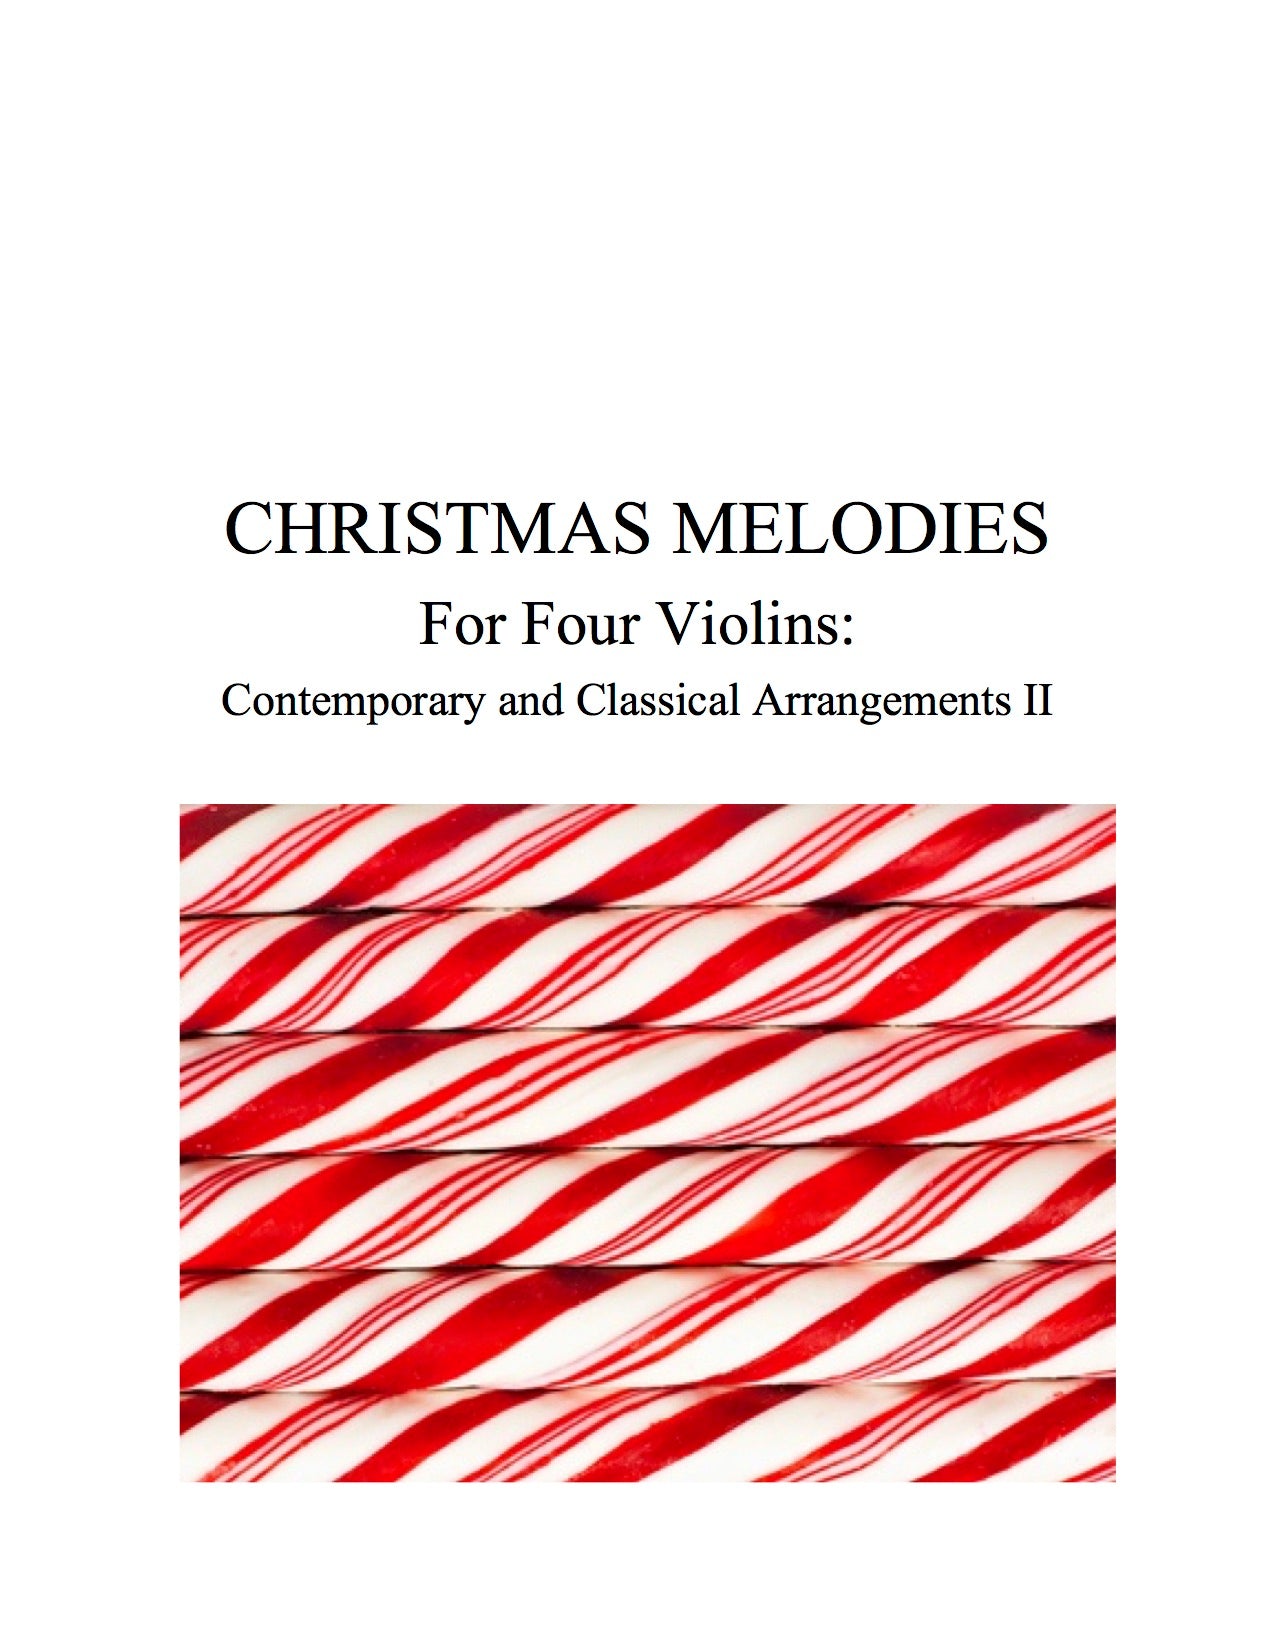 045 - Christmas Melodies For Four Violins, Volume II